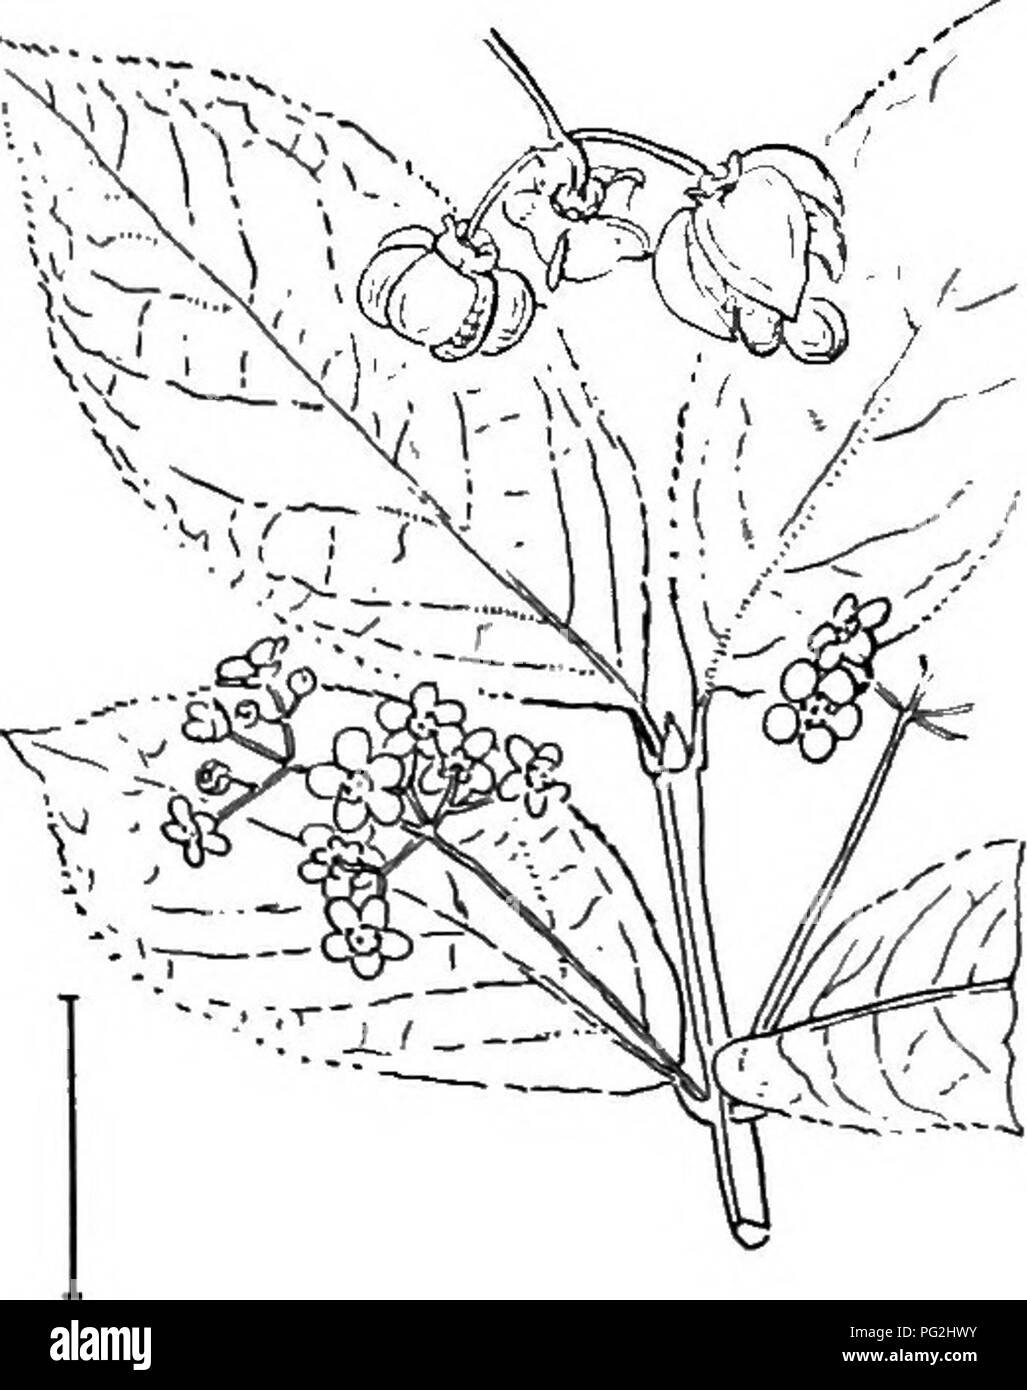 . Ornamental shrubs of the United States (hardy, cultivated). Shrubs. FiQ. 80. — Warty Euonymus. Fia. 81. — European Spindle Tree. opposite leaves and generally 4-^ided twigs, fruit, which is very ornamental in the fall, for the determination of the group by the beginner in the study of shrubs. These two colors are shown when the capsule bursts open and the bright red- or orange- coated seeds appear. KuNNiNo EnoNTMus, (75) or Strawbeekt Bush — Euonymus obov&amp;,tus — has a straggling growth 2 to 5 feet high, thrives well in shady places, and receives its name from the rough warty strawberry-l Stock Photo